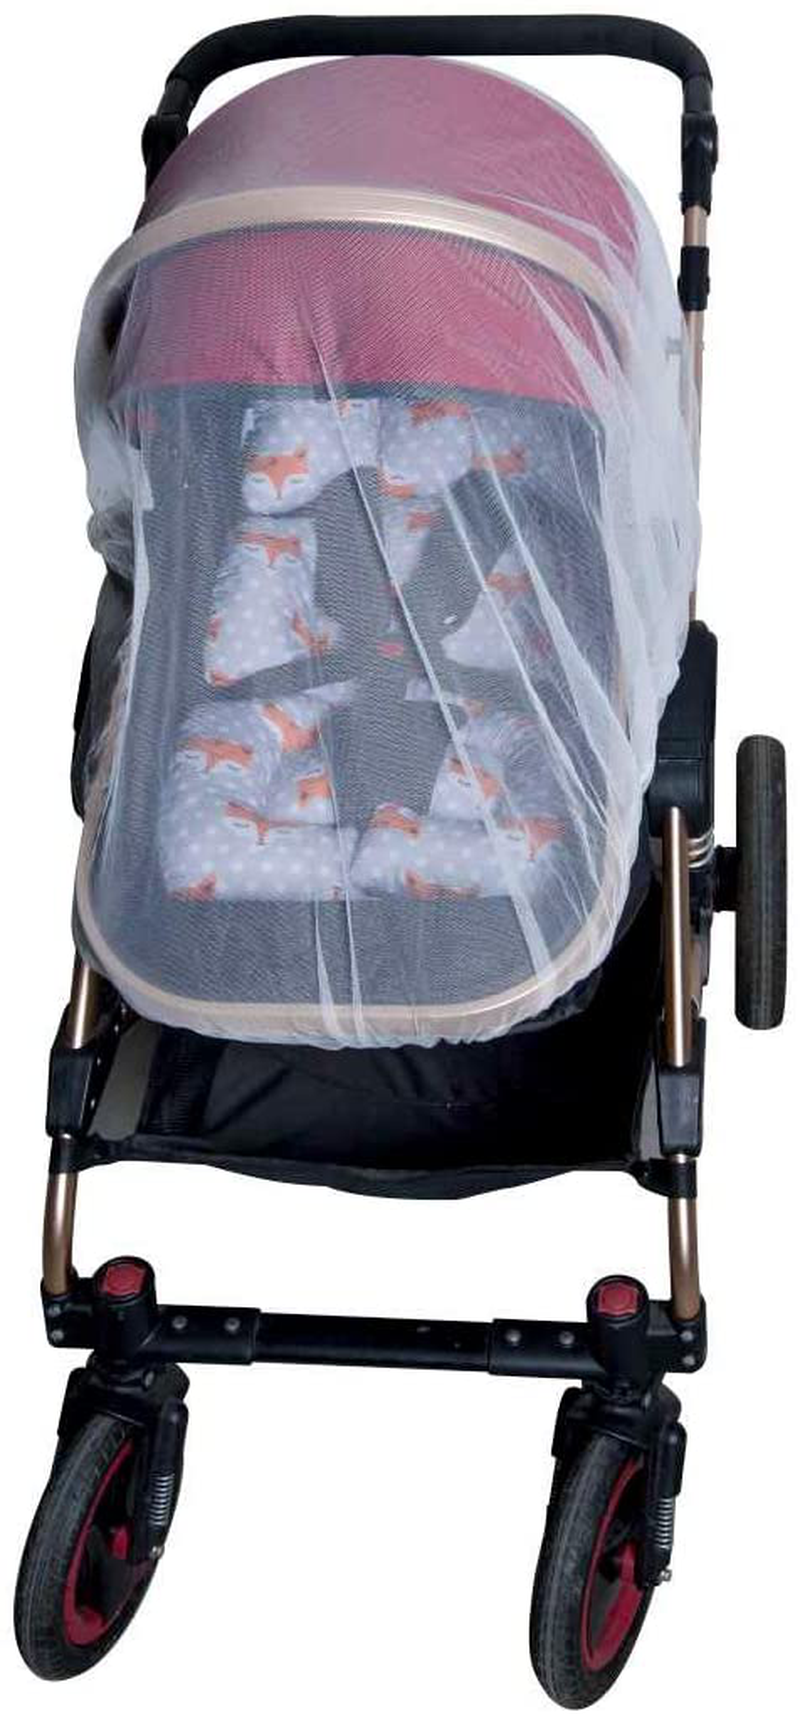 Enovoe Mosquito Net for Stroller - Durable Baby Stroller Mosquito Net - Perfect Bug Net for Strollers, Bassinets, Cradles, Playards, Pack N Plays and Portable Mini Crib(White) Sporting Goods > Outdoor Recreation > Camping & Hiking > Mosquito Nets & Insect Screens Enovoe   